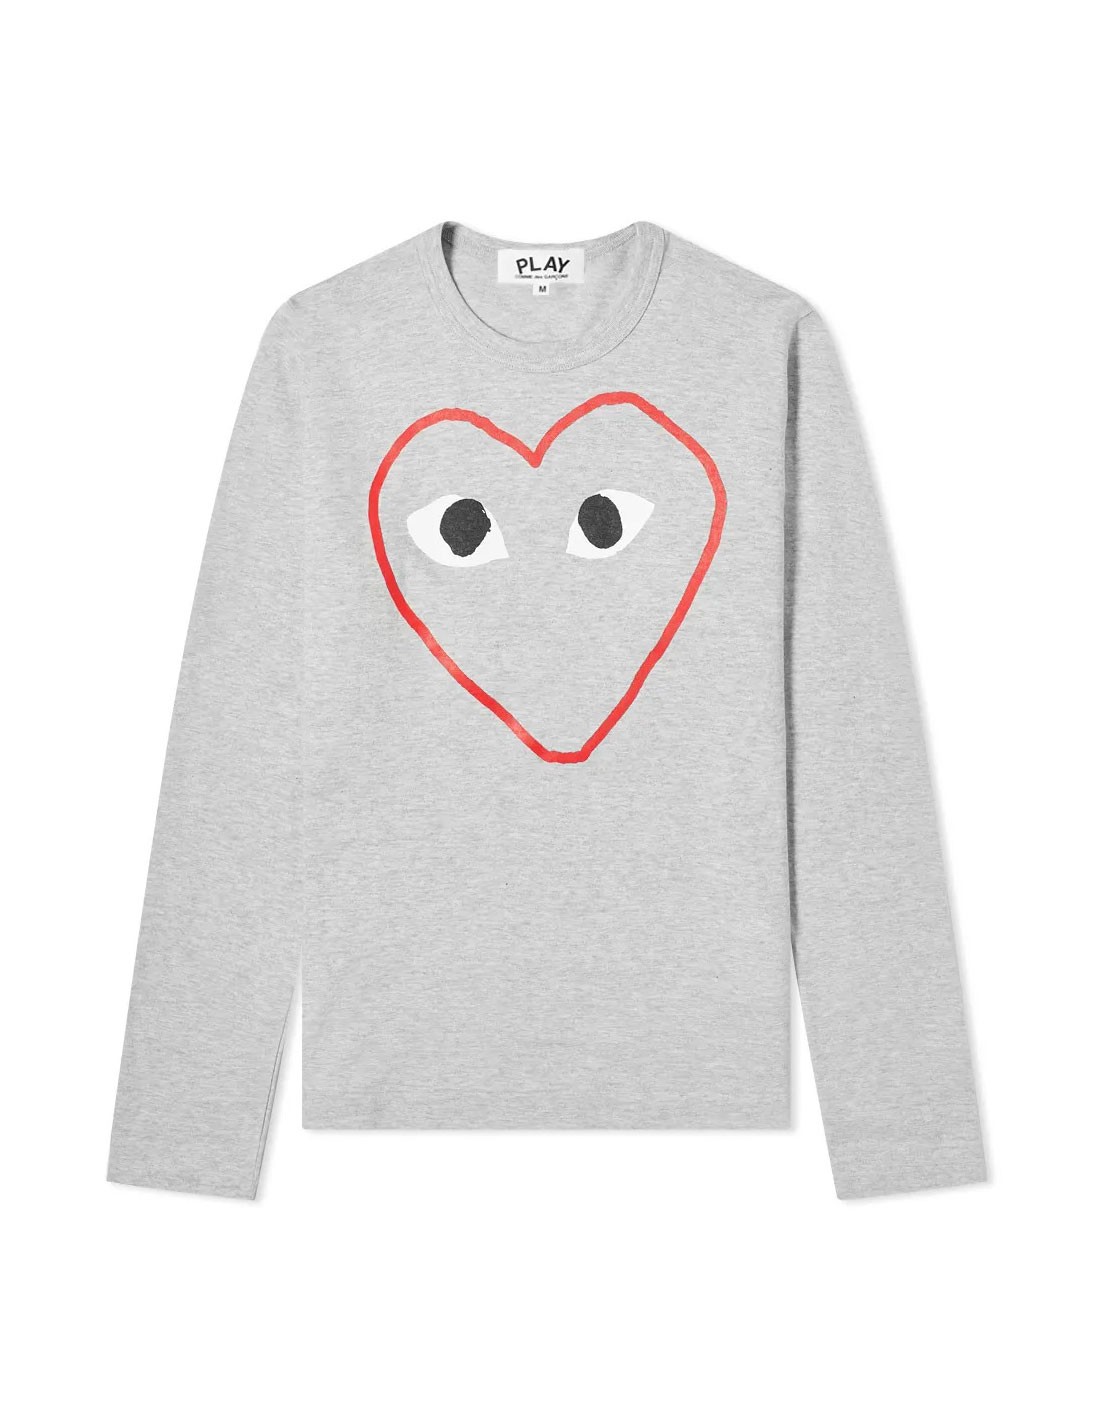 CDG grey long sleeves tee with detour